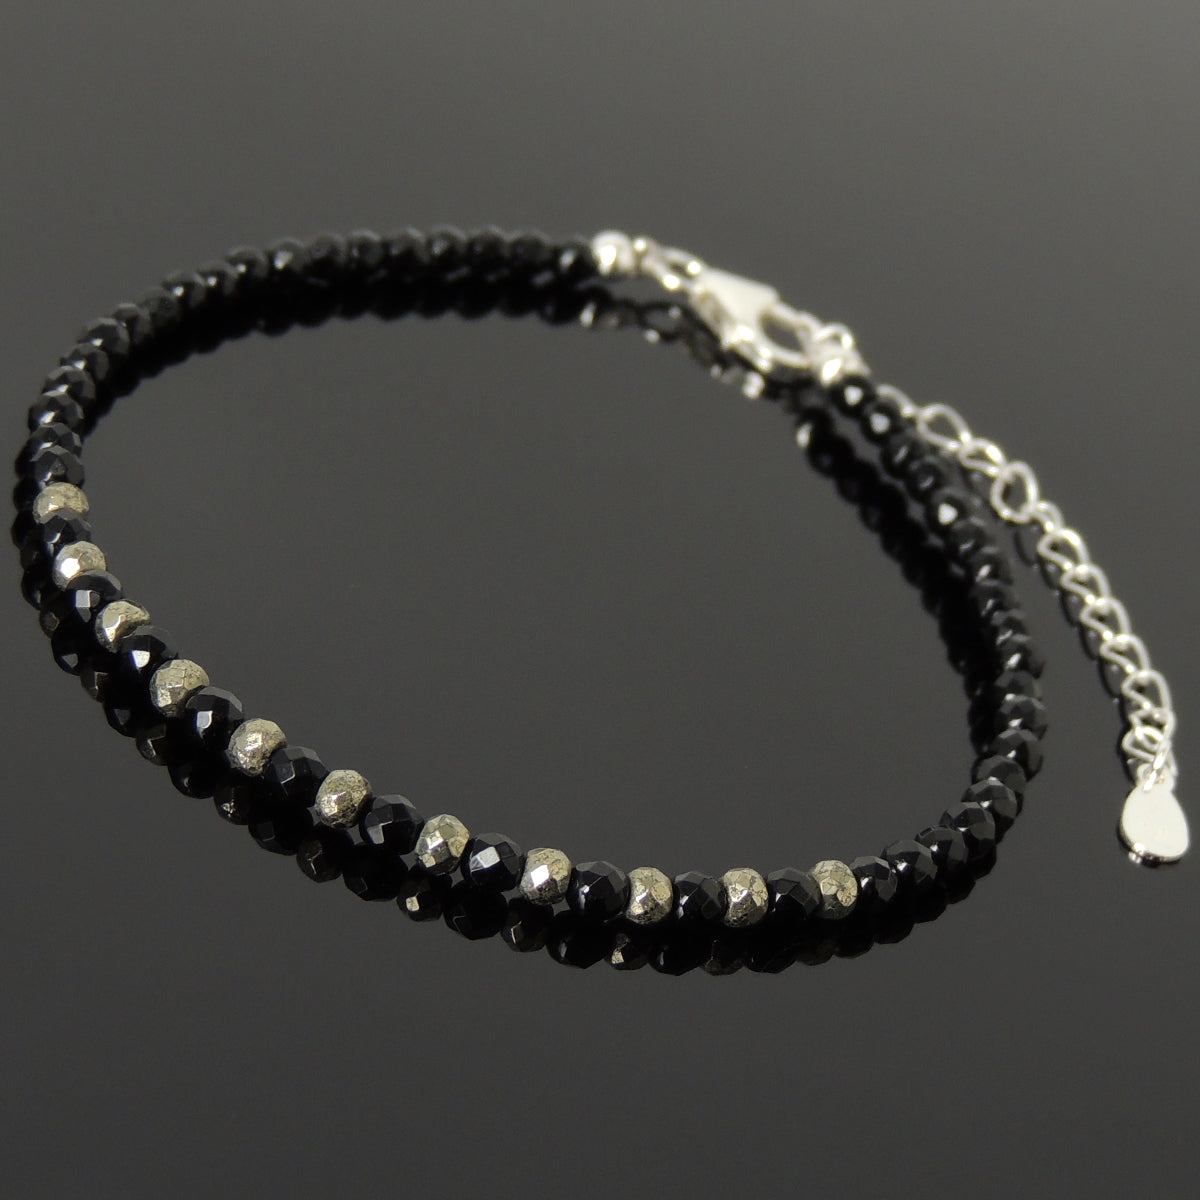 3mm Faceted Bright Black Onyx & Gold Pyrite Healing Gemstone Bracelet with S925 Sterling Silver Chain & Clasp - Handmade by Gem & Silver BR1217